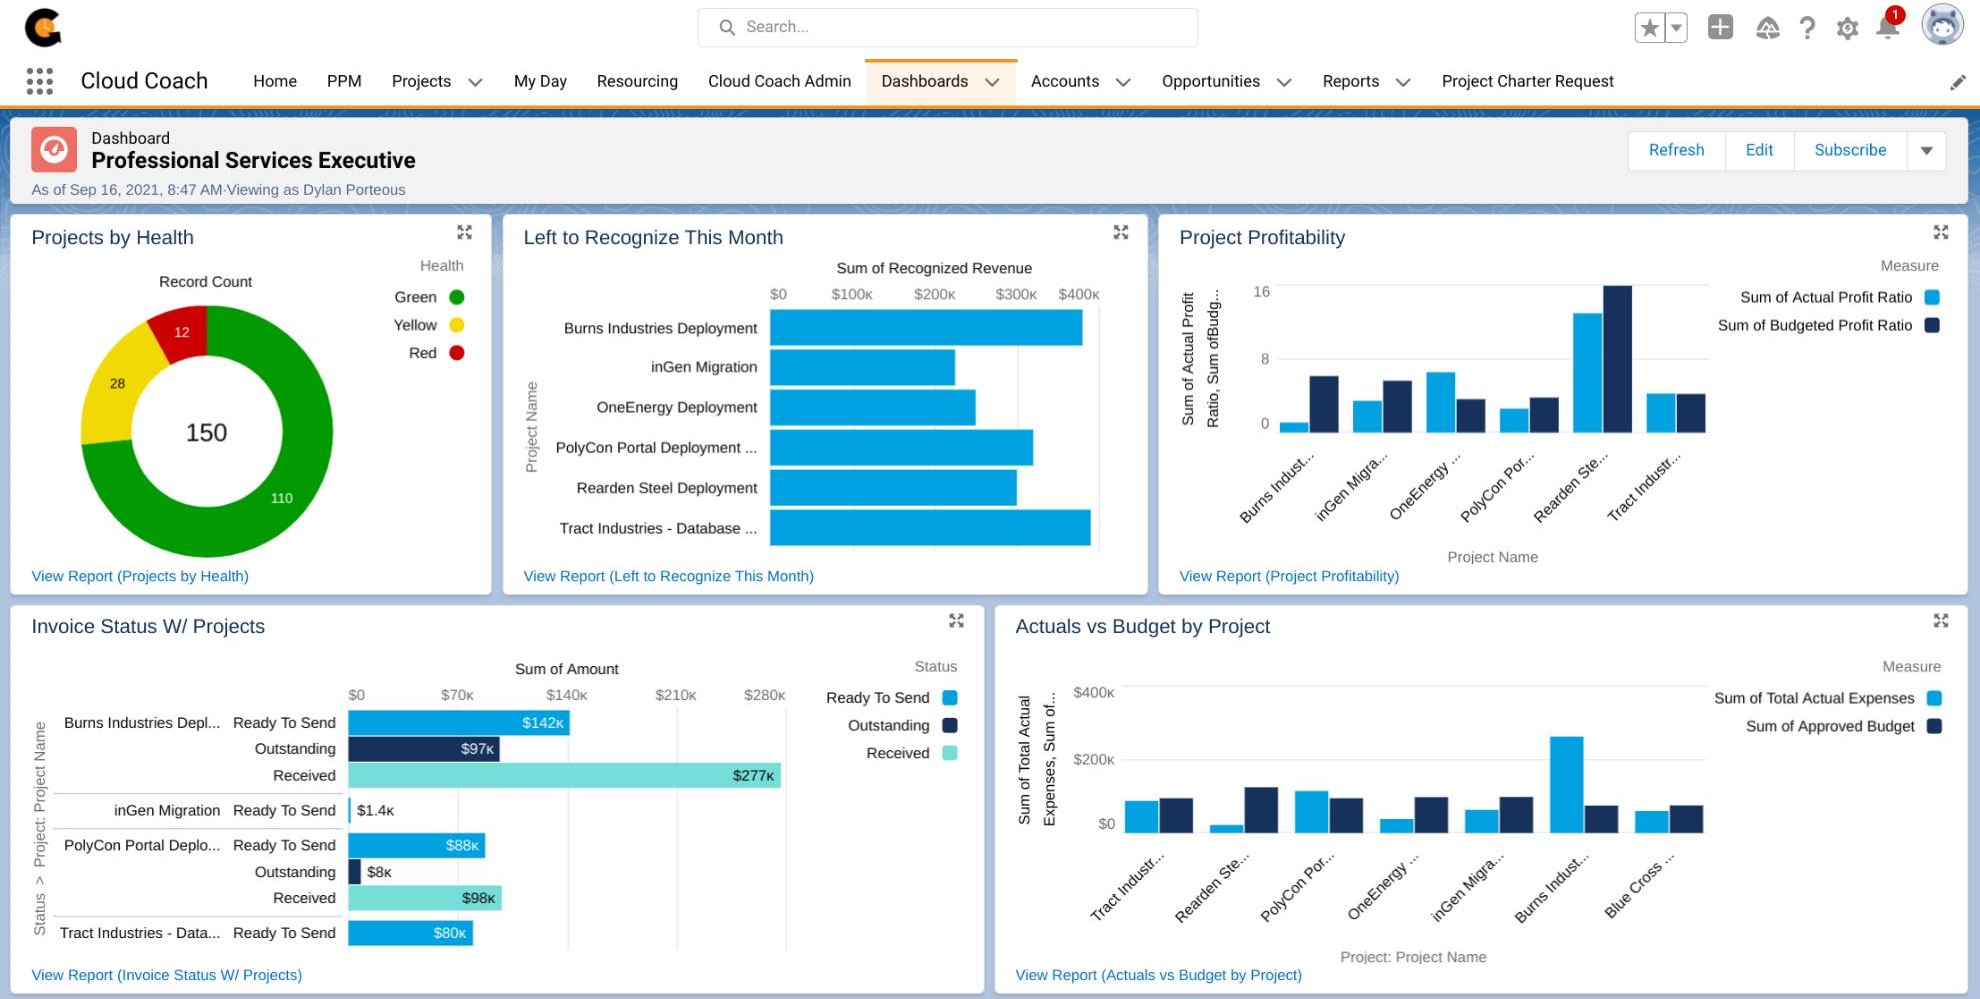 Professional Services Executive Dashboard 2